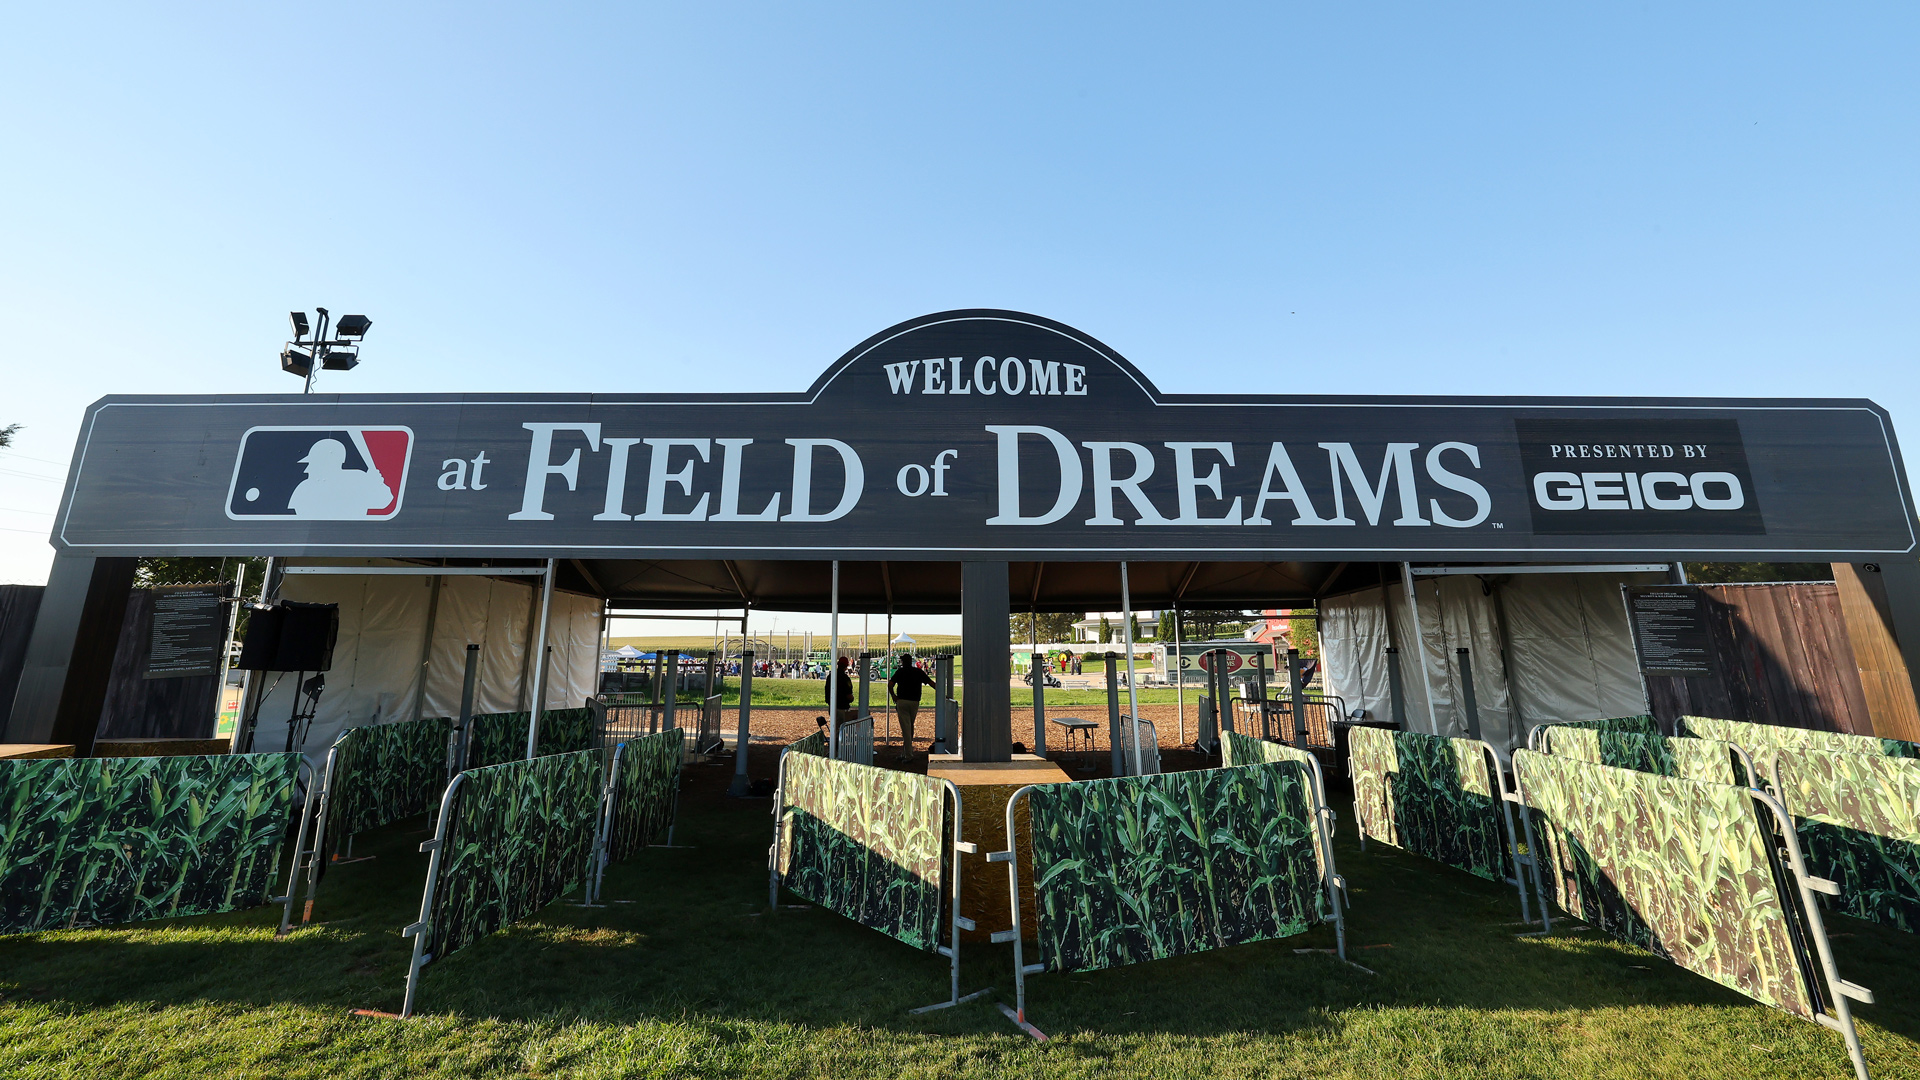 Field of Dreams: How to get Chicago Cubs and Cincinnati Reds